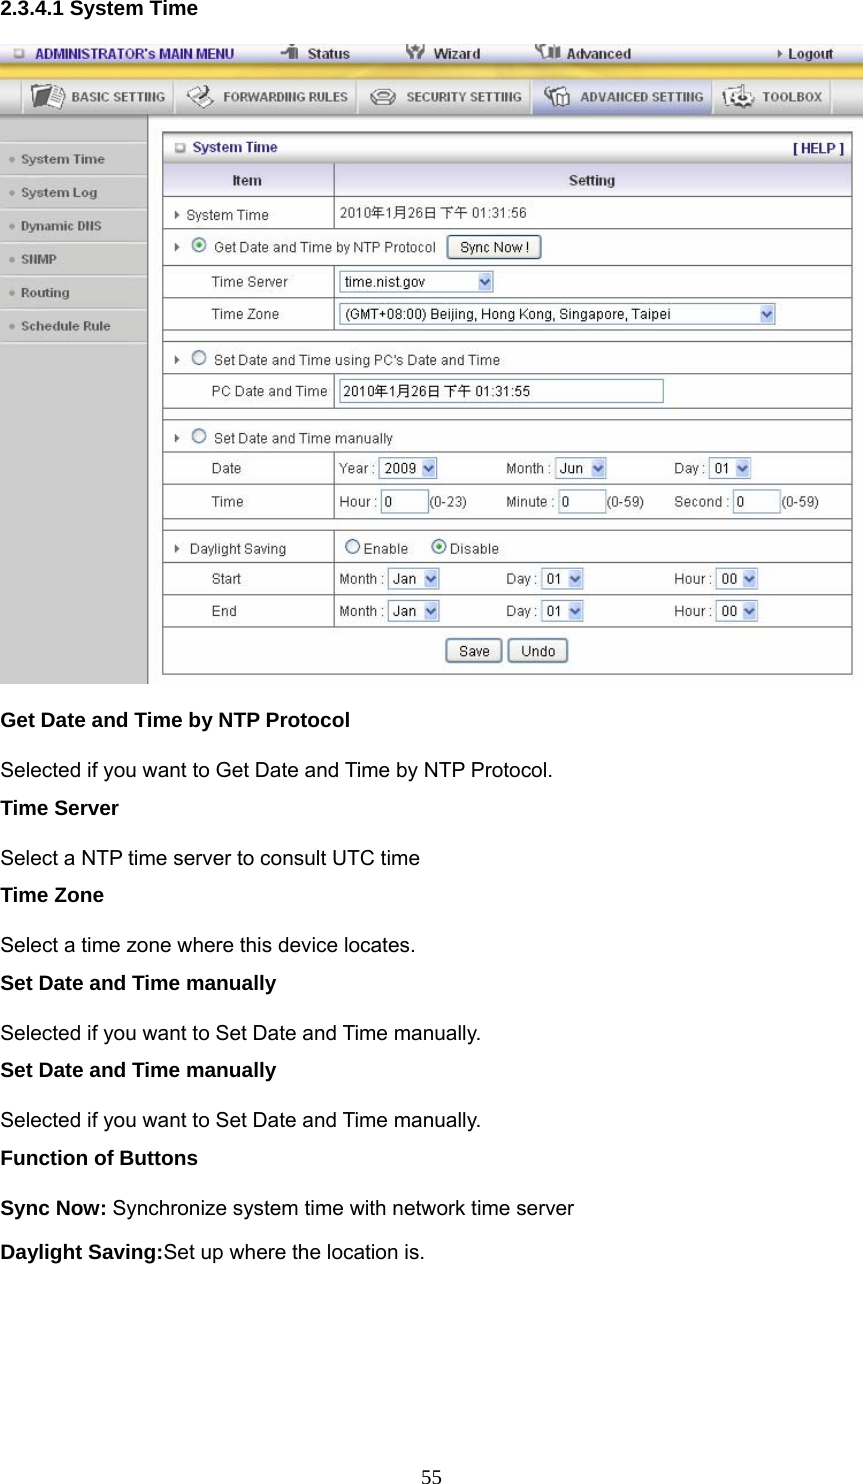  552.3.4.1 System Time  Get Date and Time by NTP Protocol Selected if you want to Get Date and Time by NTP Protocol.   Time Server Select a NTP time server to consult UTC time   Time Zone Select a time zone where this device locates.   Set Date and Time manually Selected if you want to Set Date and Time manually.   Set Date and Time manually Selected if you want to Set Date and Time manually. Function of Buttons Sync Now: Synchronize system time with network time server Daylight Saving:Set up where the location is. 